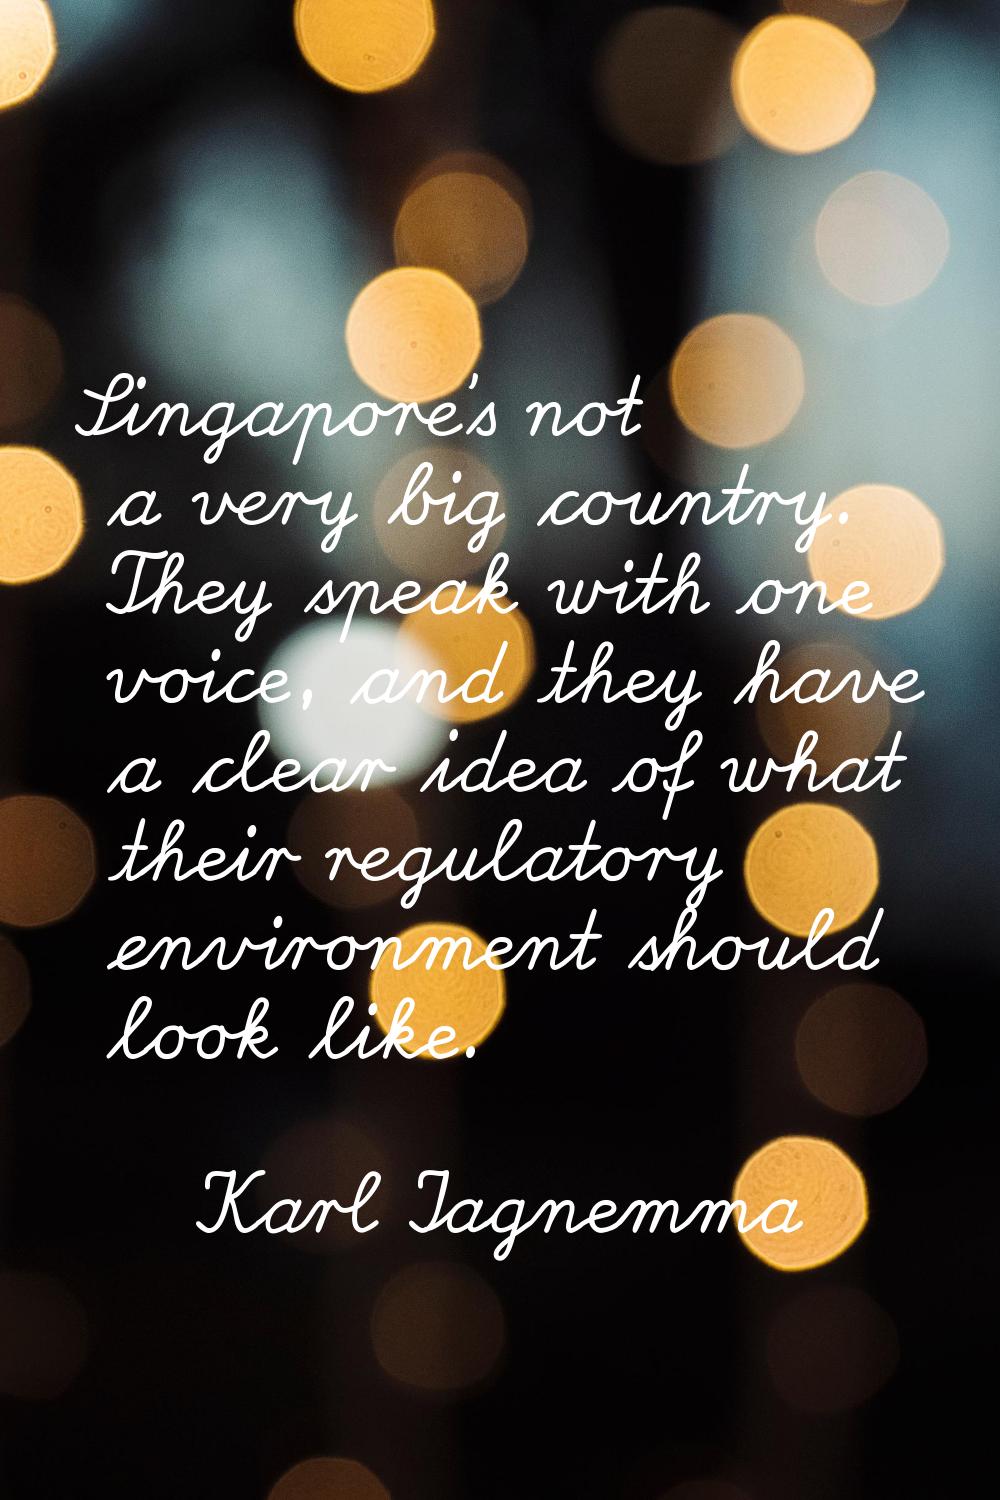 Singapore's not a very big country. They speak with one voice, and they have a clear idea of what t